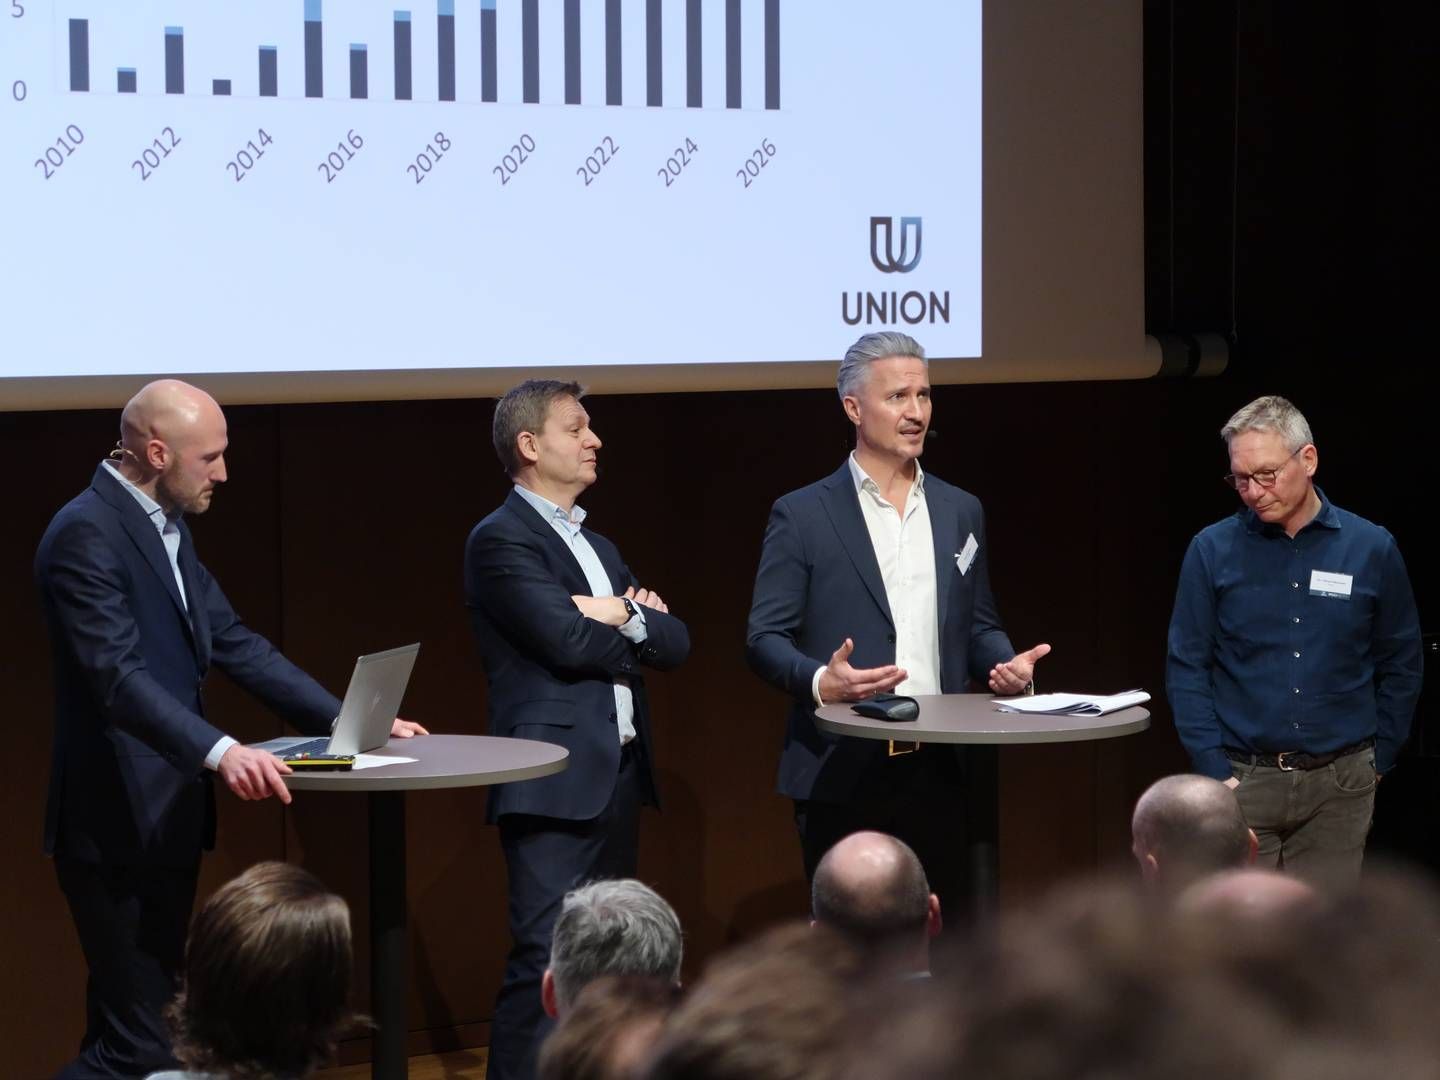 From left: Robert Nystad, head of research at UNION, Pål Ringholm, CIO of PKH, Tom Hestnes, CEO of Norselab, and Per-Håvard Martinsen of Pareto Securities, at Norwegian UNION's recent investor seminar. | Photo: Øystein Byberg